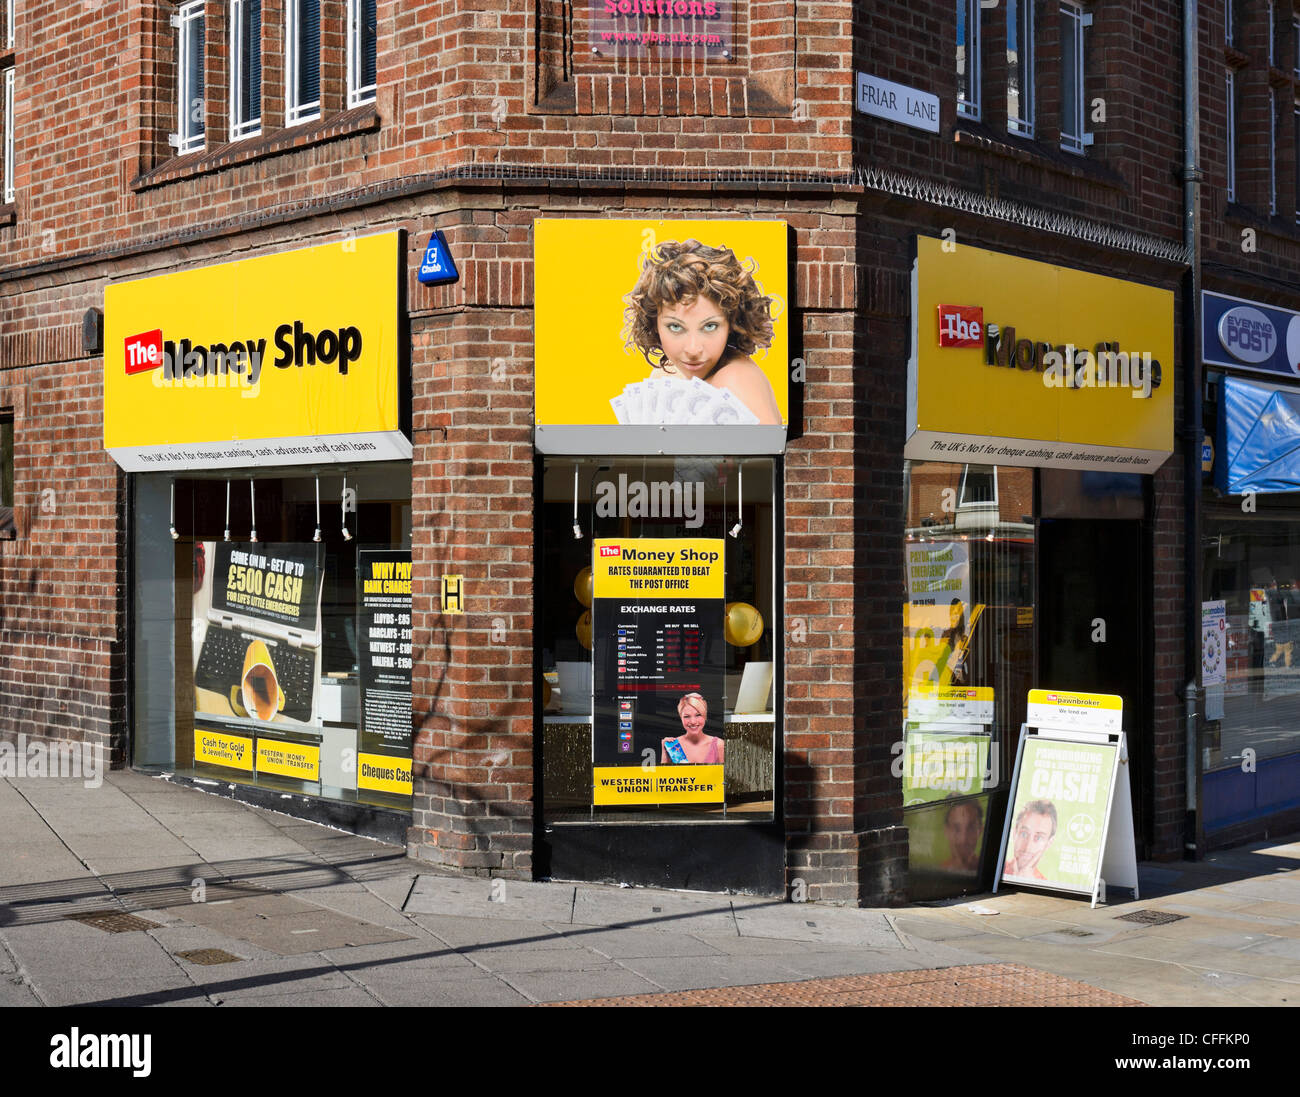 Branch of the payday loan chain The Money Shop, Nottingham, England, UK Stock Photo